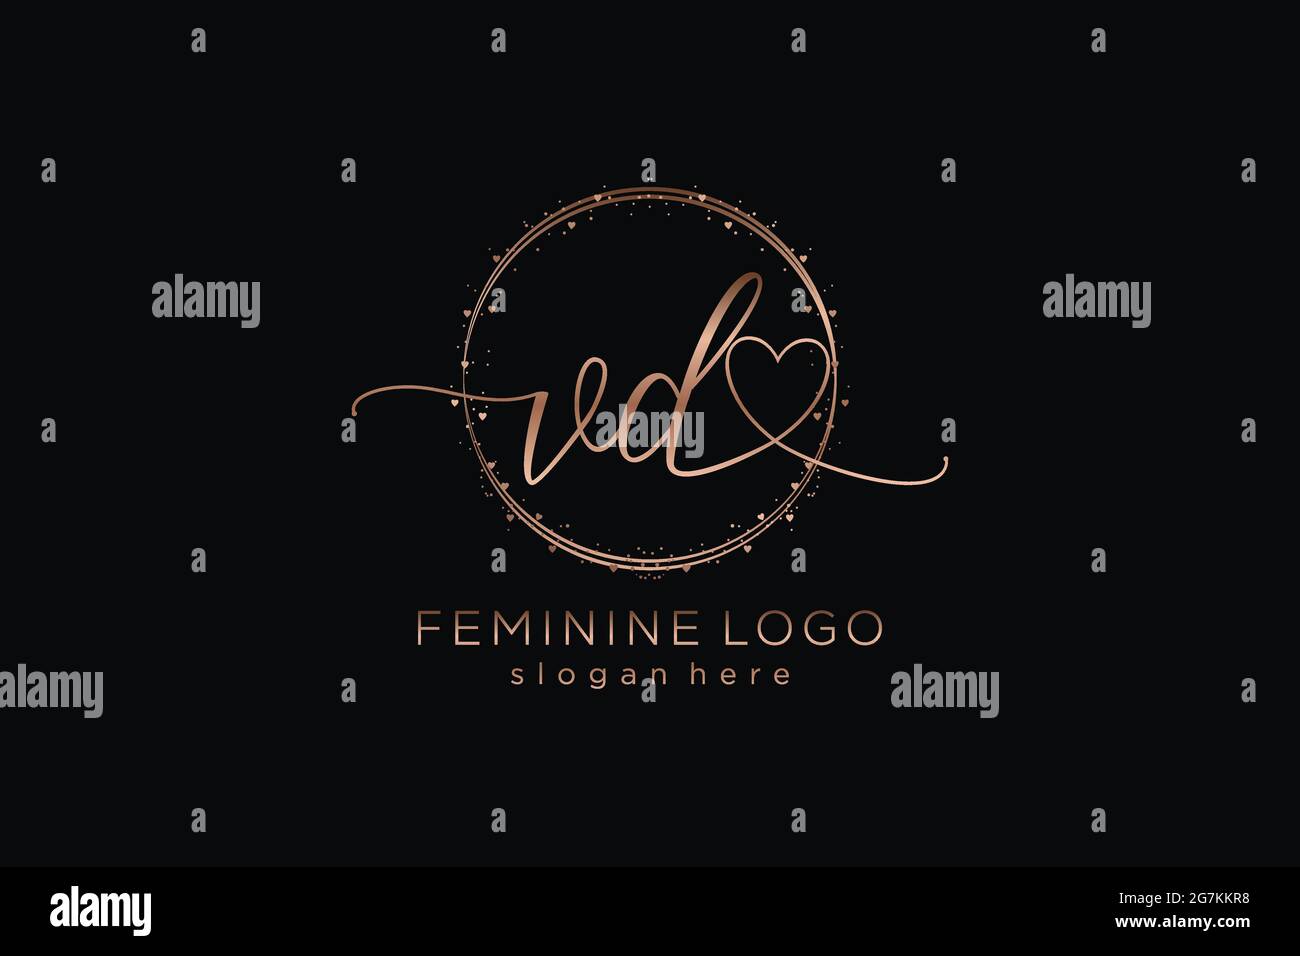 VD handwriting logo with circle template vector logo of initial wedding, fashion, floral and botanical with creative template. Stock Vector